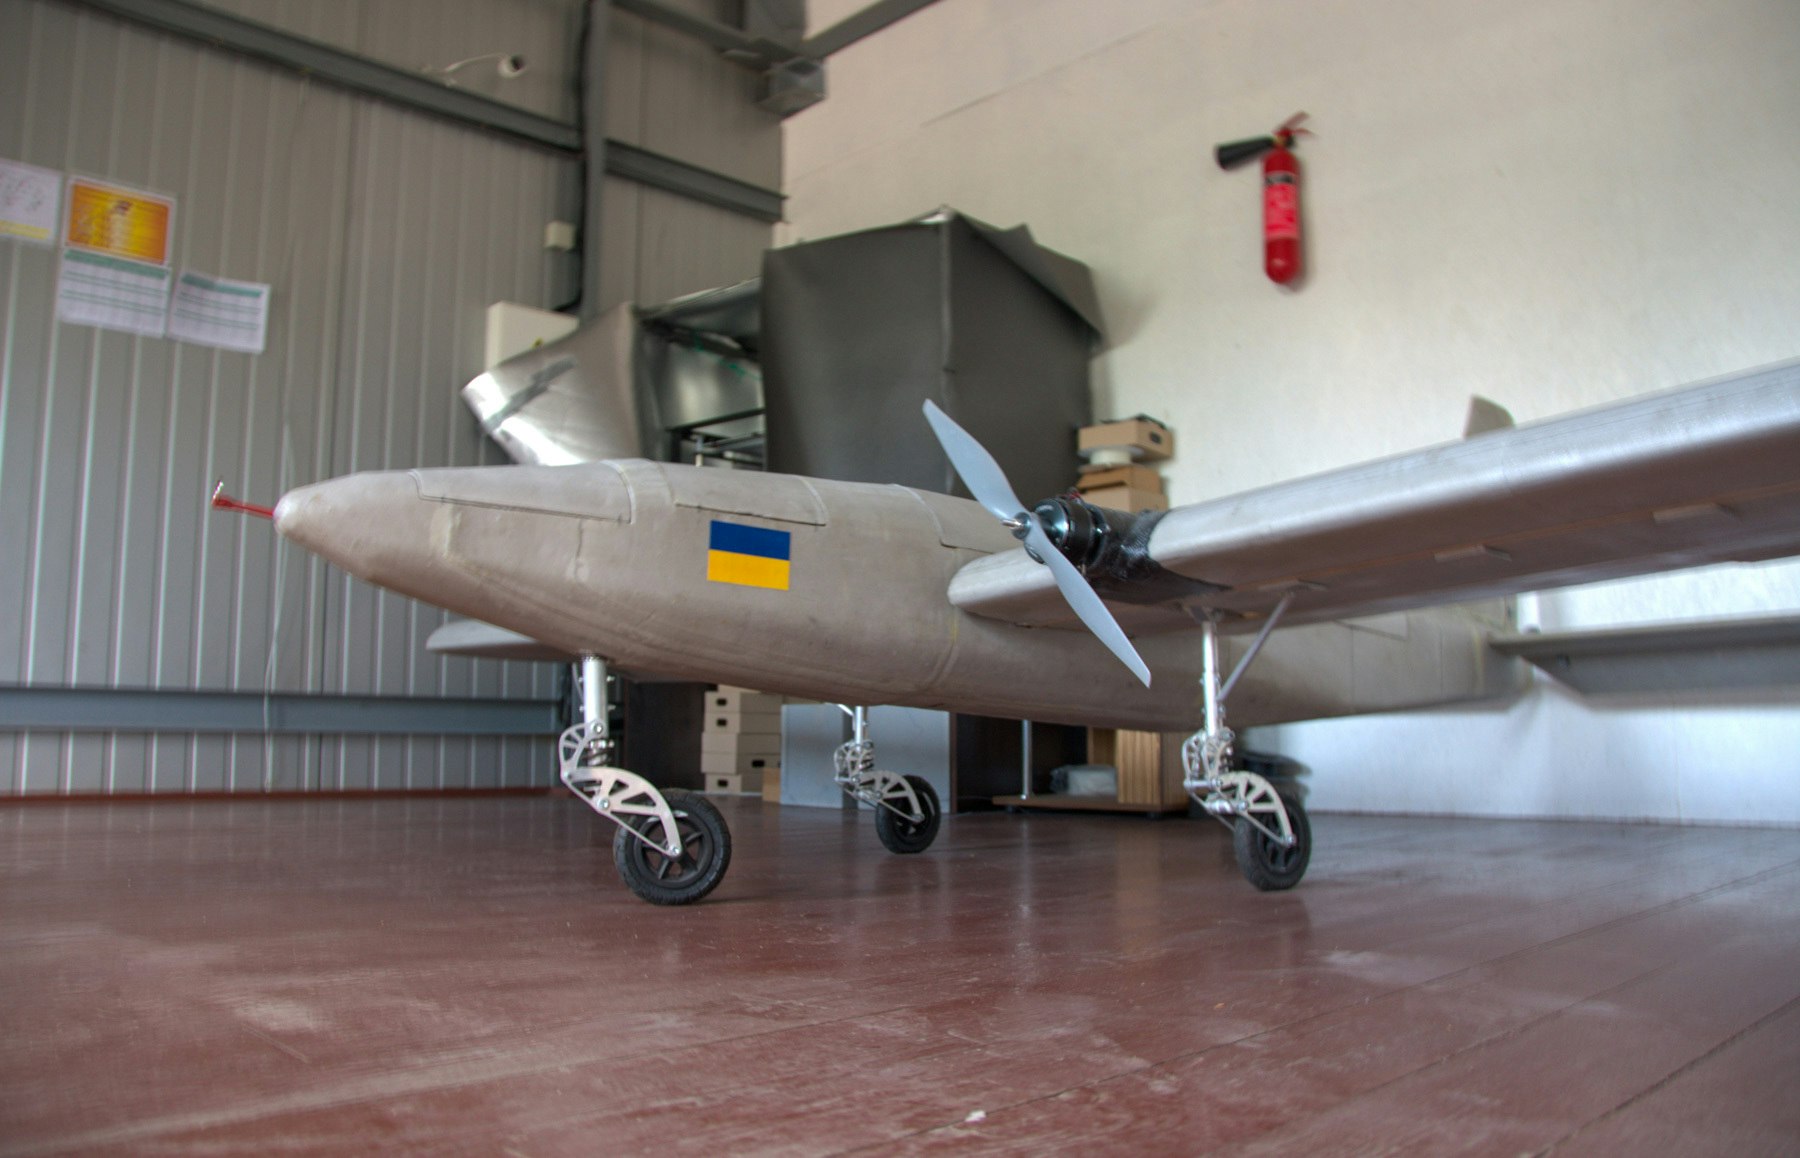 A photograph of an AirLogix drone, with a Ukrainian flag painted on its side, in a hangar